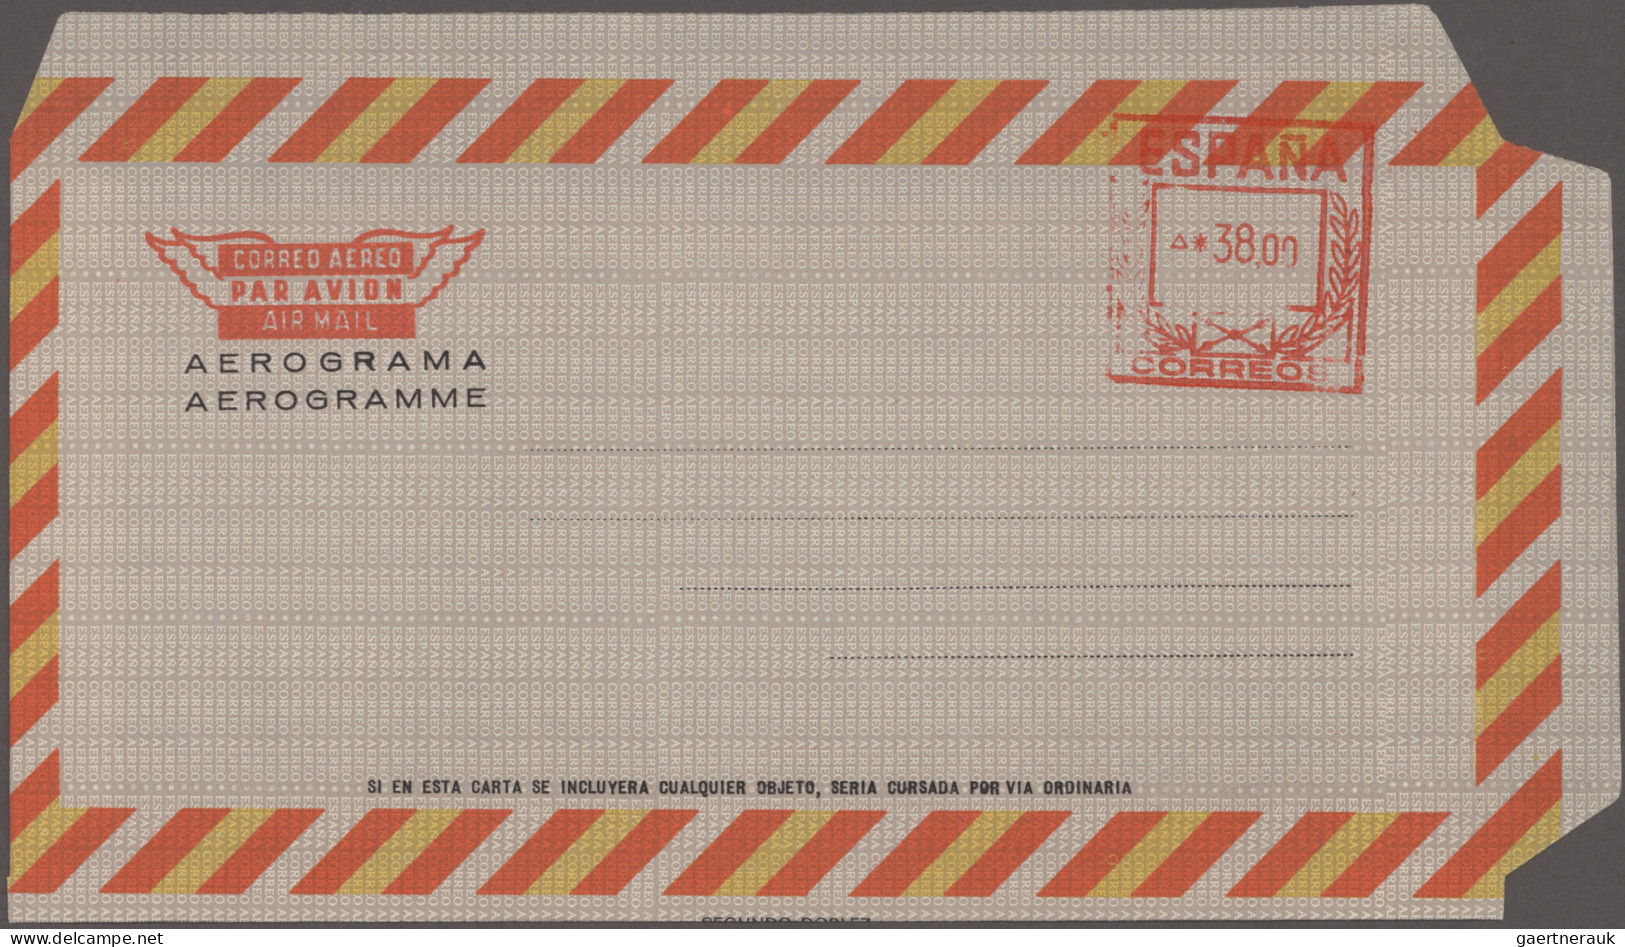 Spain - postal stationery: 1947/2002, collection of 90 air letter sheets unused/